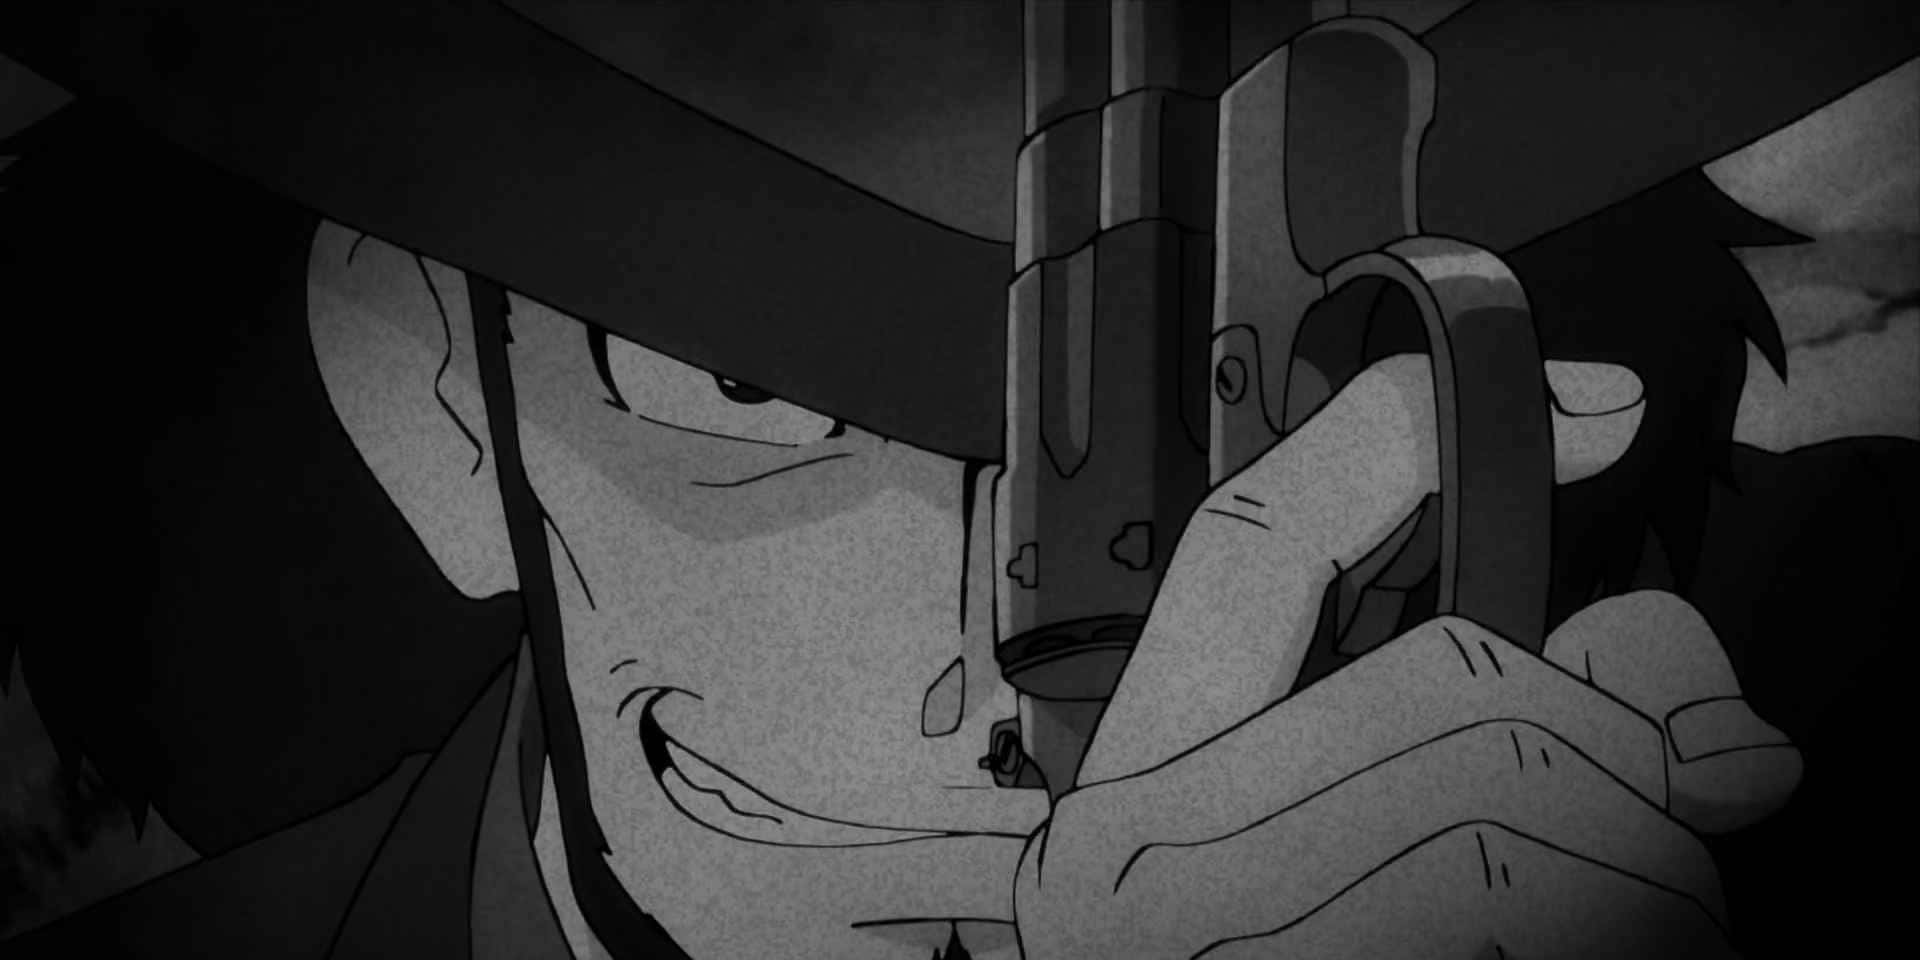 Lupin III and Daisuke Jigen posing with guns in an action-packed scene Wallpaper